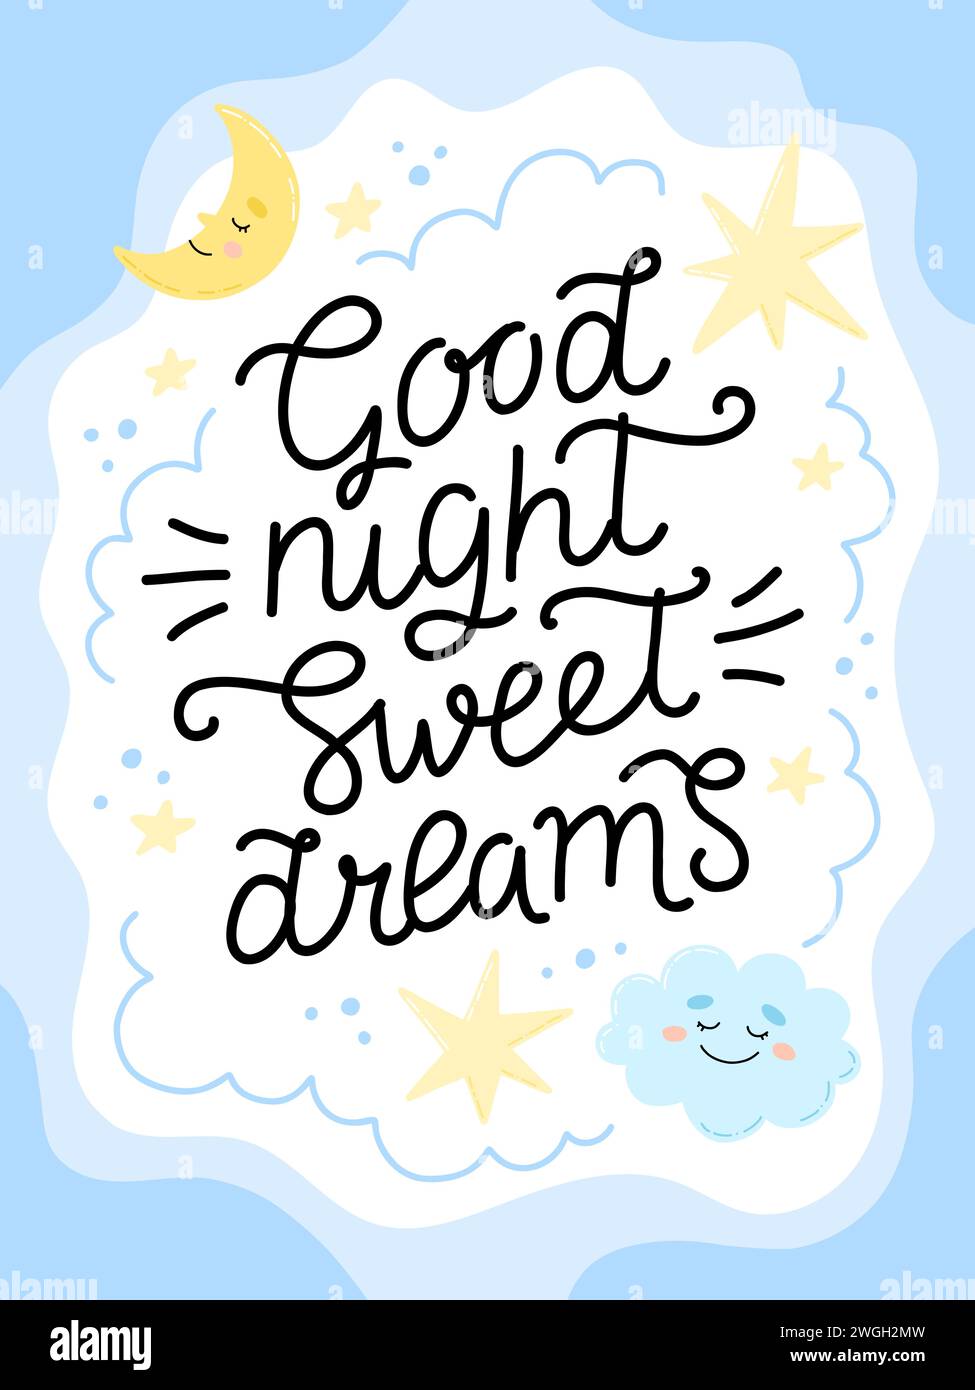 Beautiful card with wish written sweet dreams Vector Image